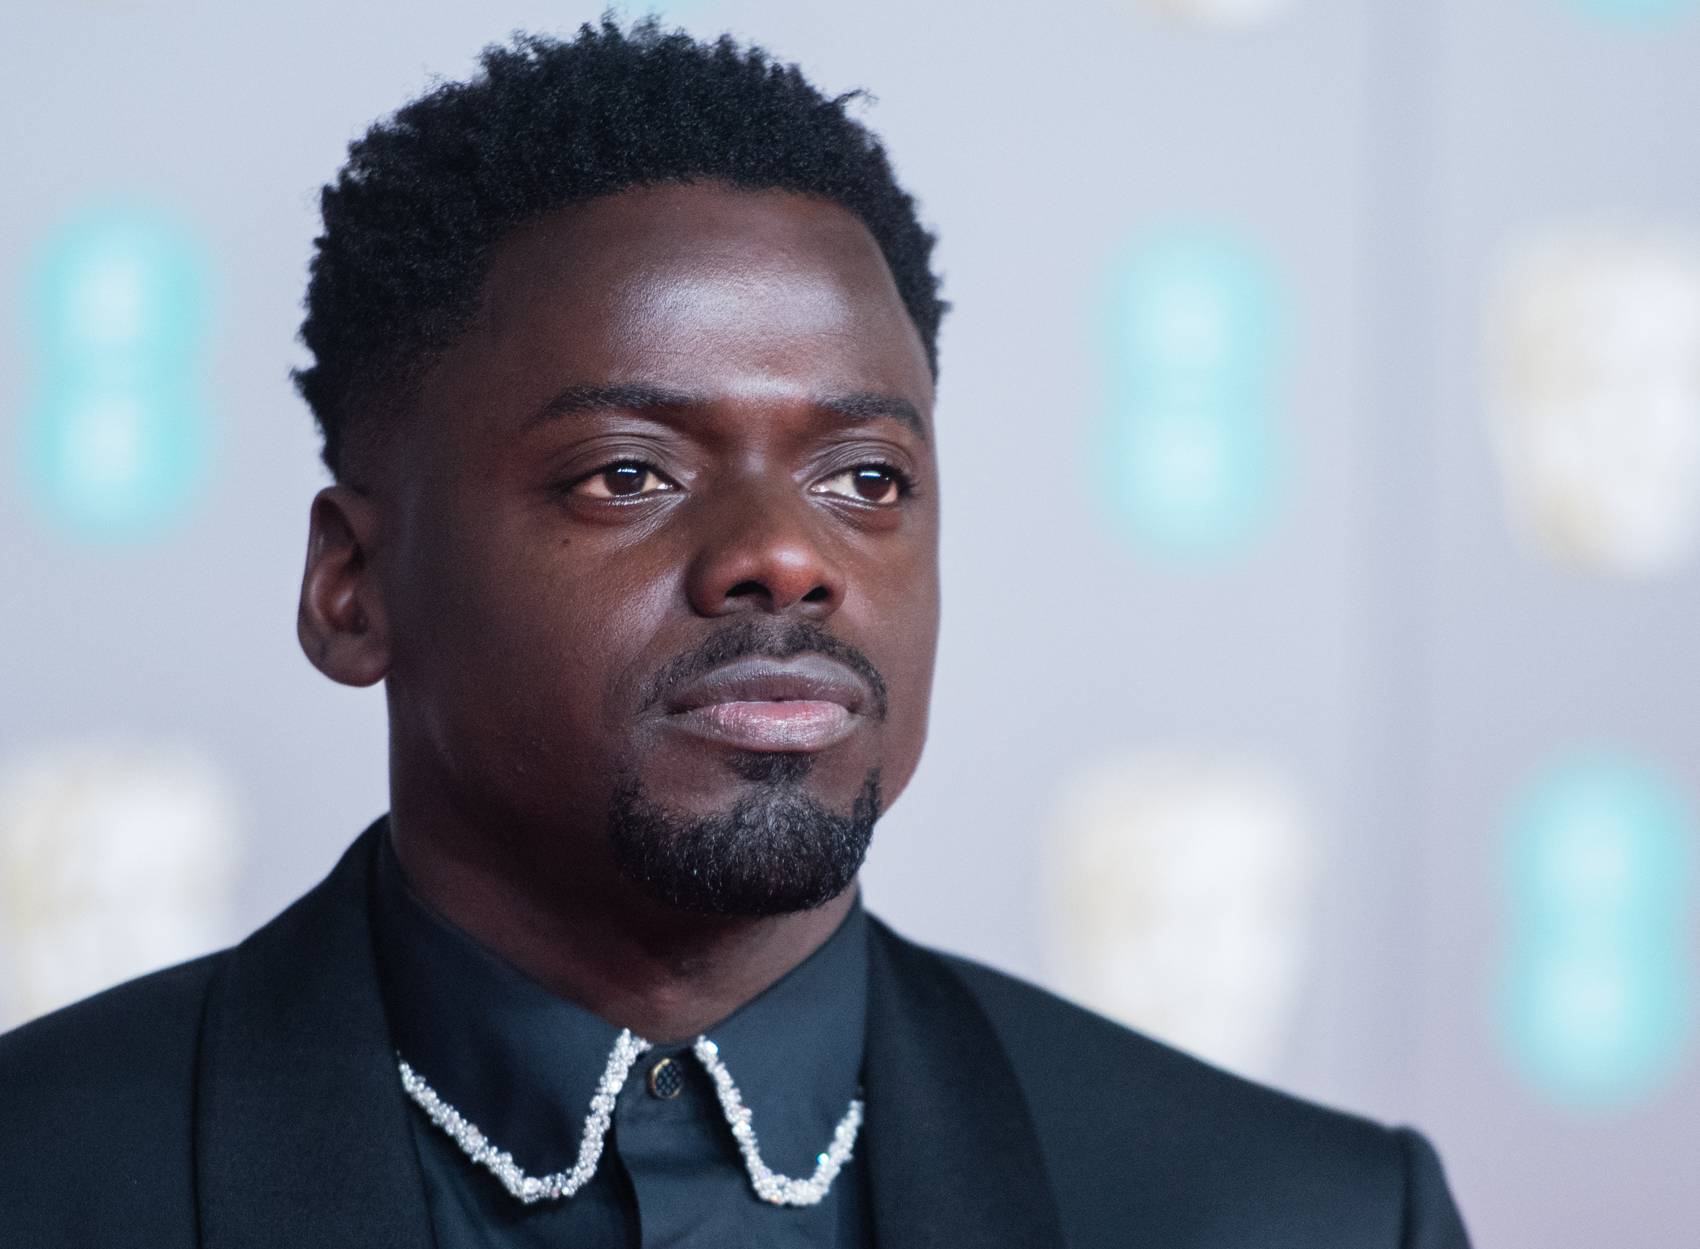 LONDON, ENGLAND - FEBRUARY 02: Daniel Kaluuya attends the EE British Academy Film Awards 2020 at Royal Albert Hall on February 02, 2020 in London, England. (Photo by Samir Hussein/WireImage)